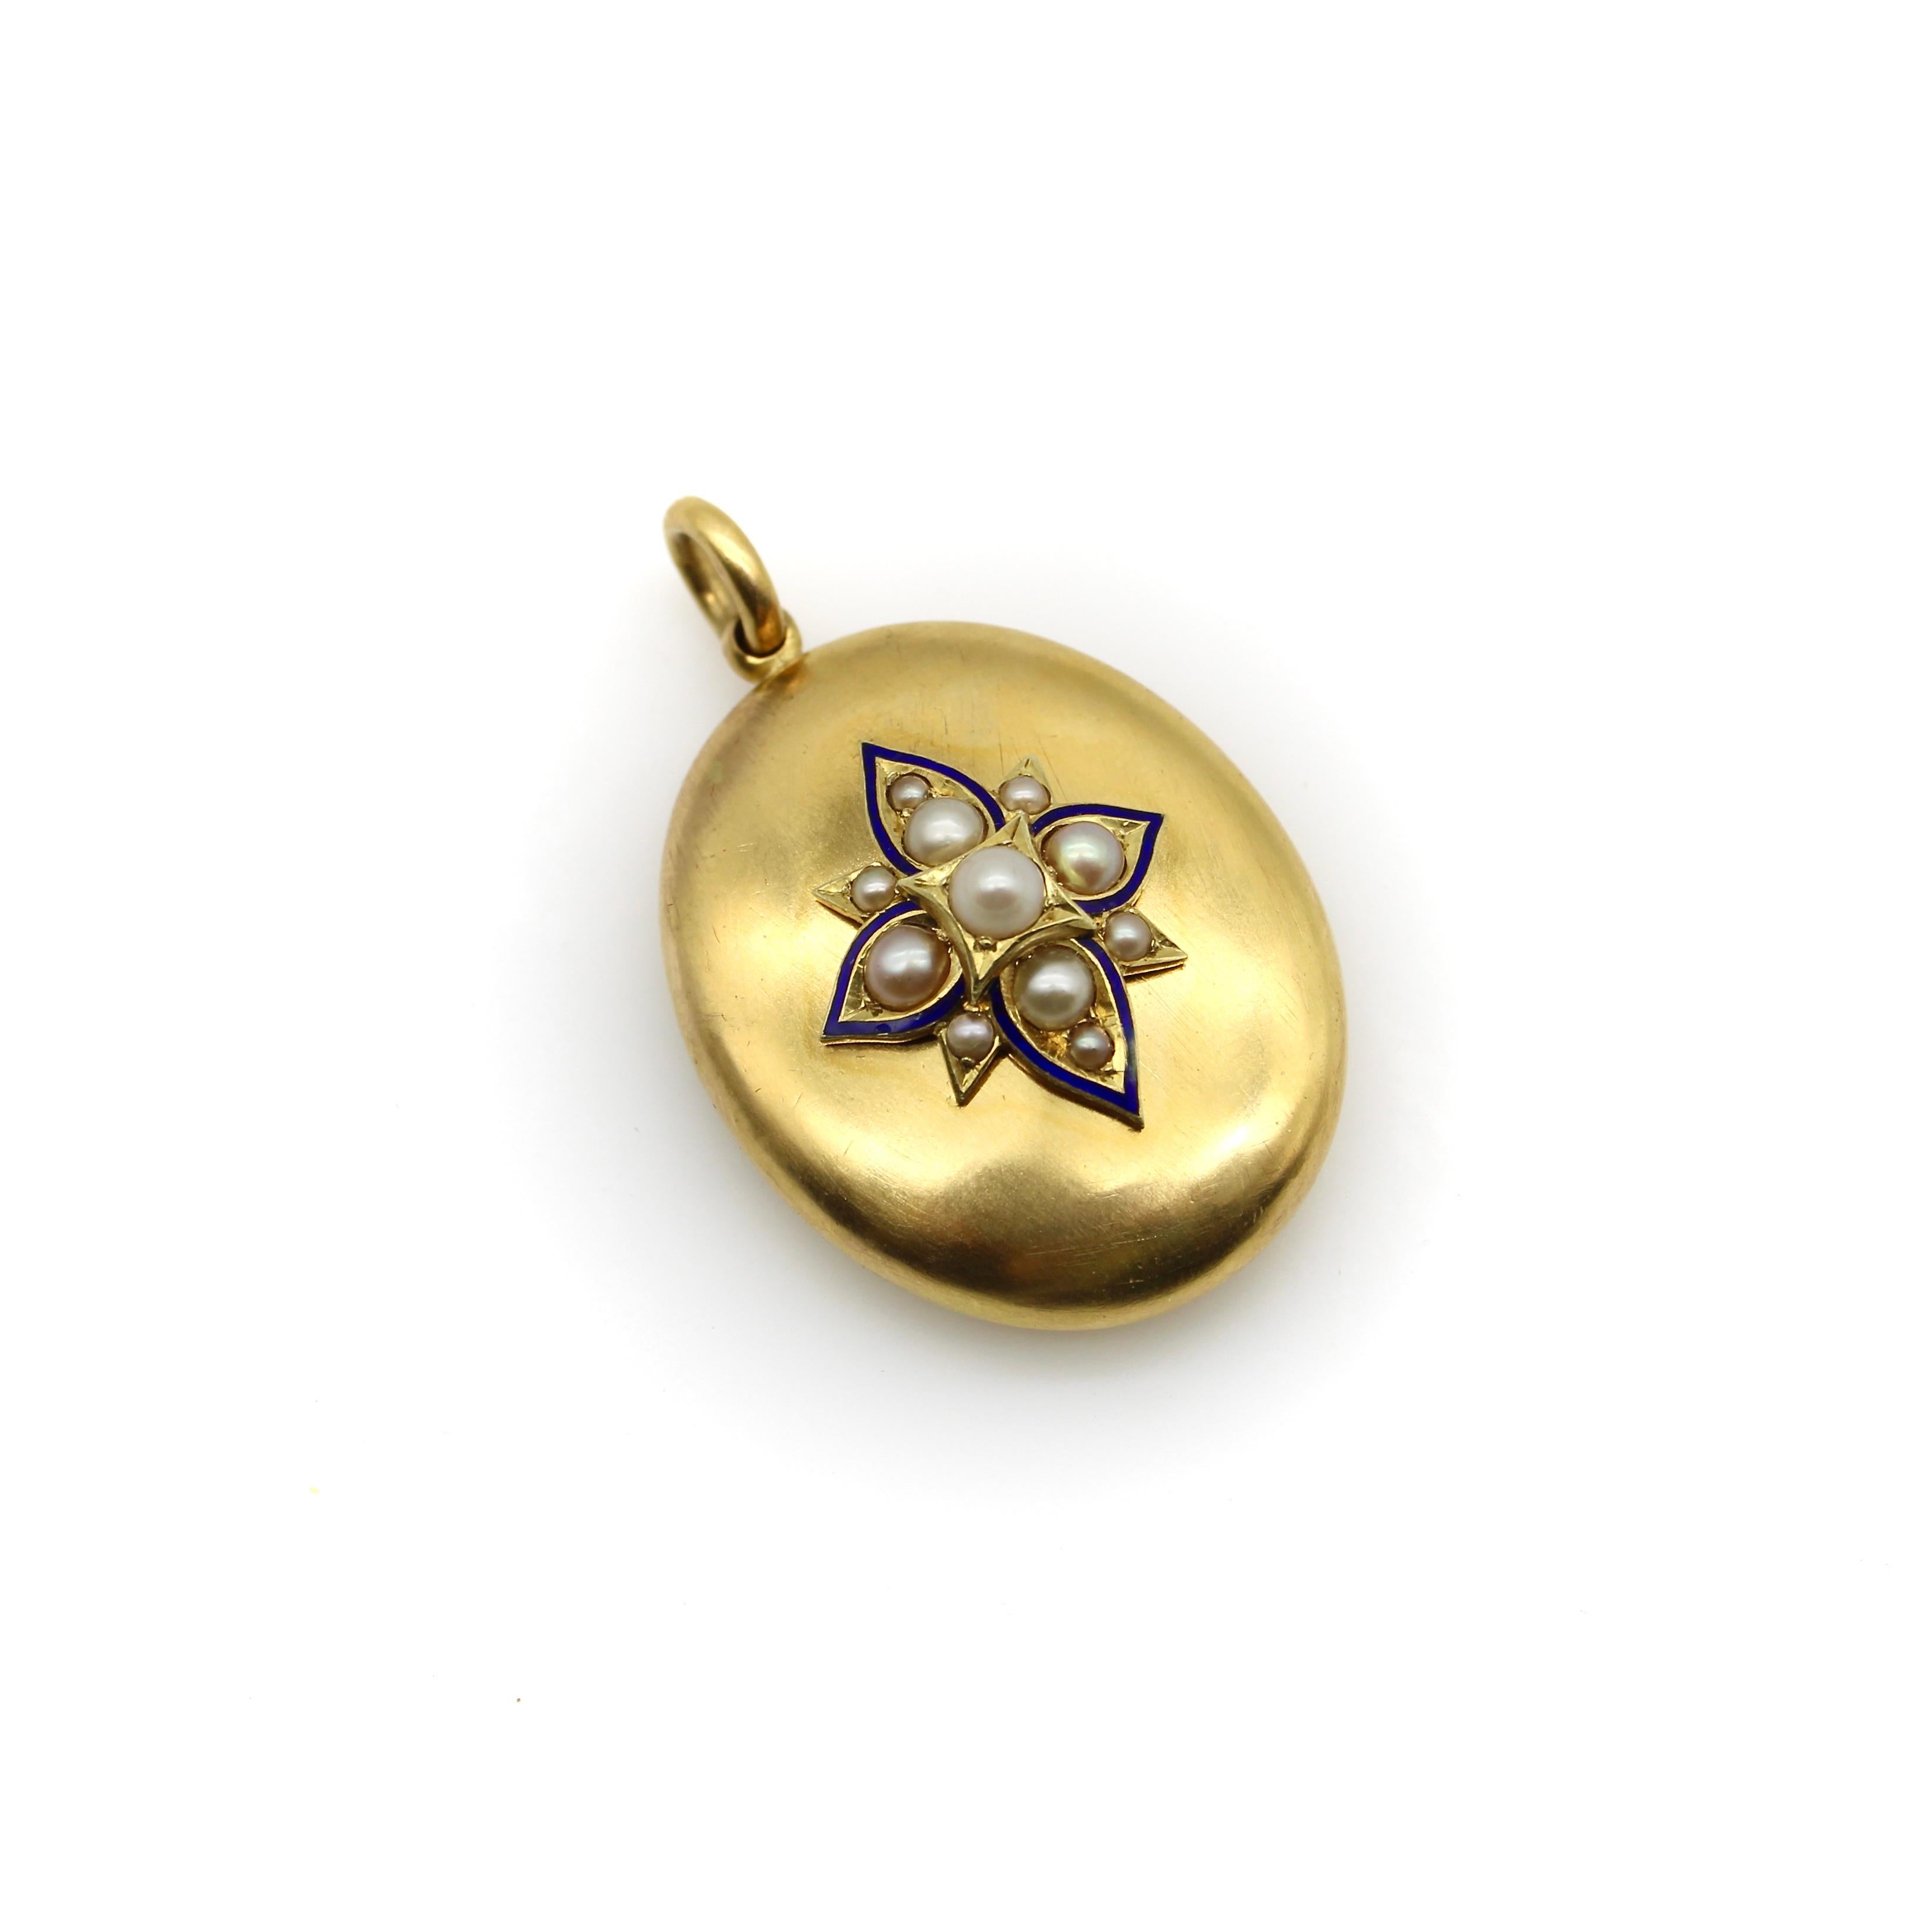 Circa the 1870’s or 1880’s, this 14k gold Victorian locket features a pearl quatrefoil flower element as its centerpiece. The floral adornment consists of 11 pearls delineated by a thin line of blue enamel. The quatrefoil has hand-engraved places